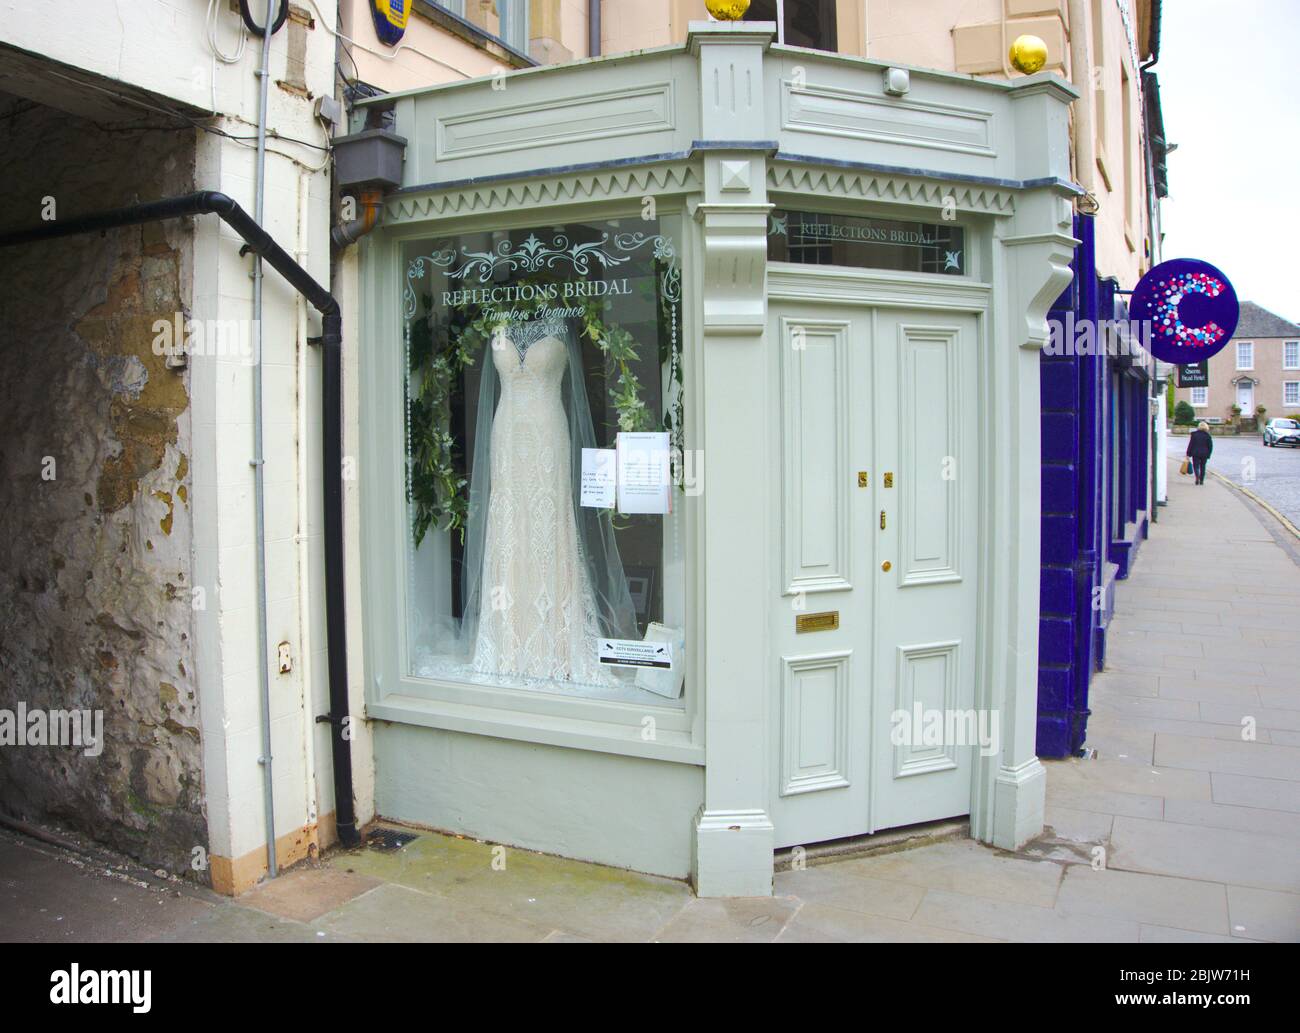 Reflections Bridal Boutique in Kelso, Scottish Borders, temporarily closed due to UK Covid-19 coronavirus lockdown policy Stock Photo